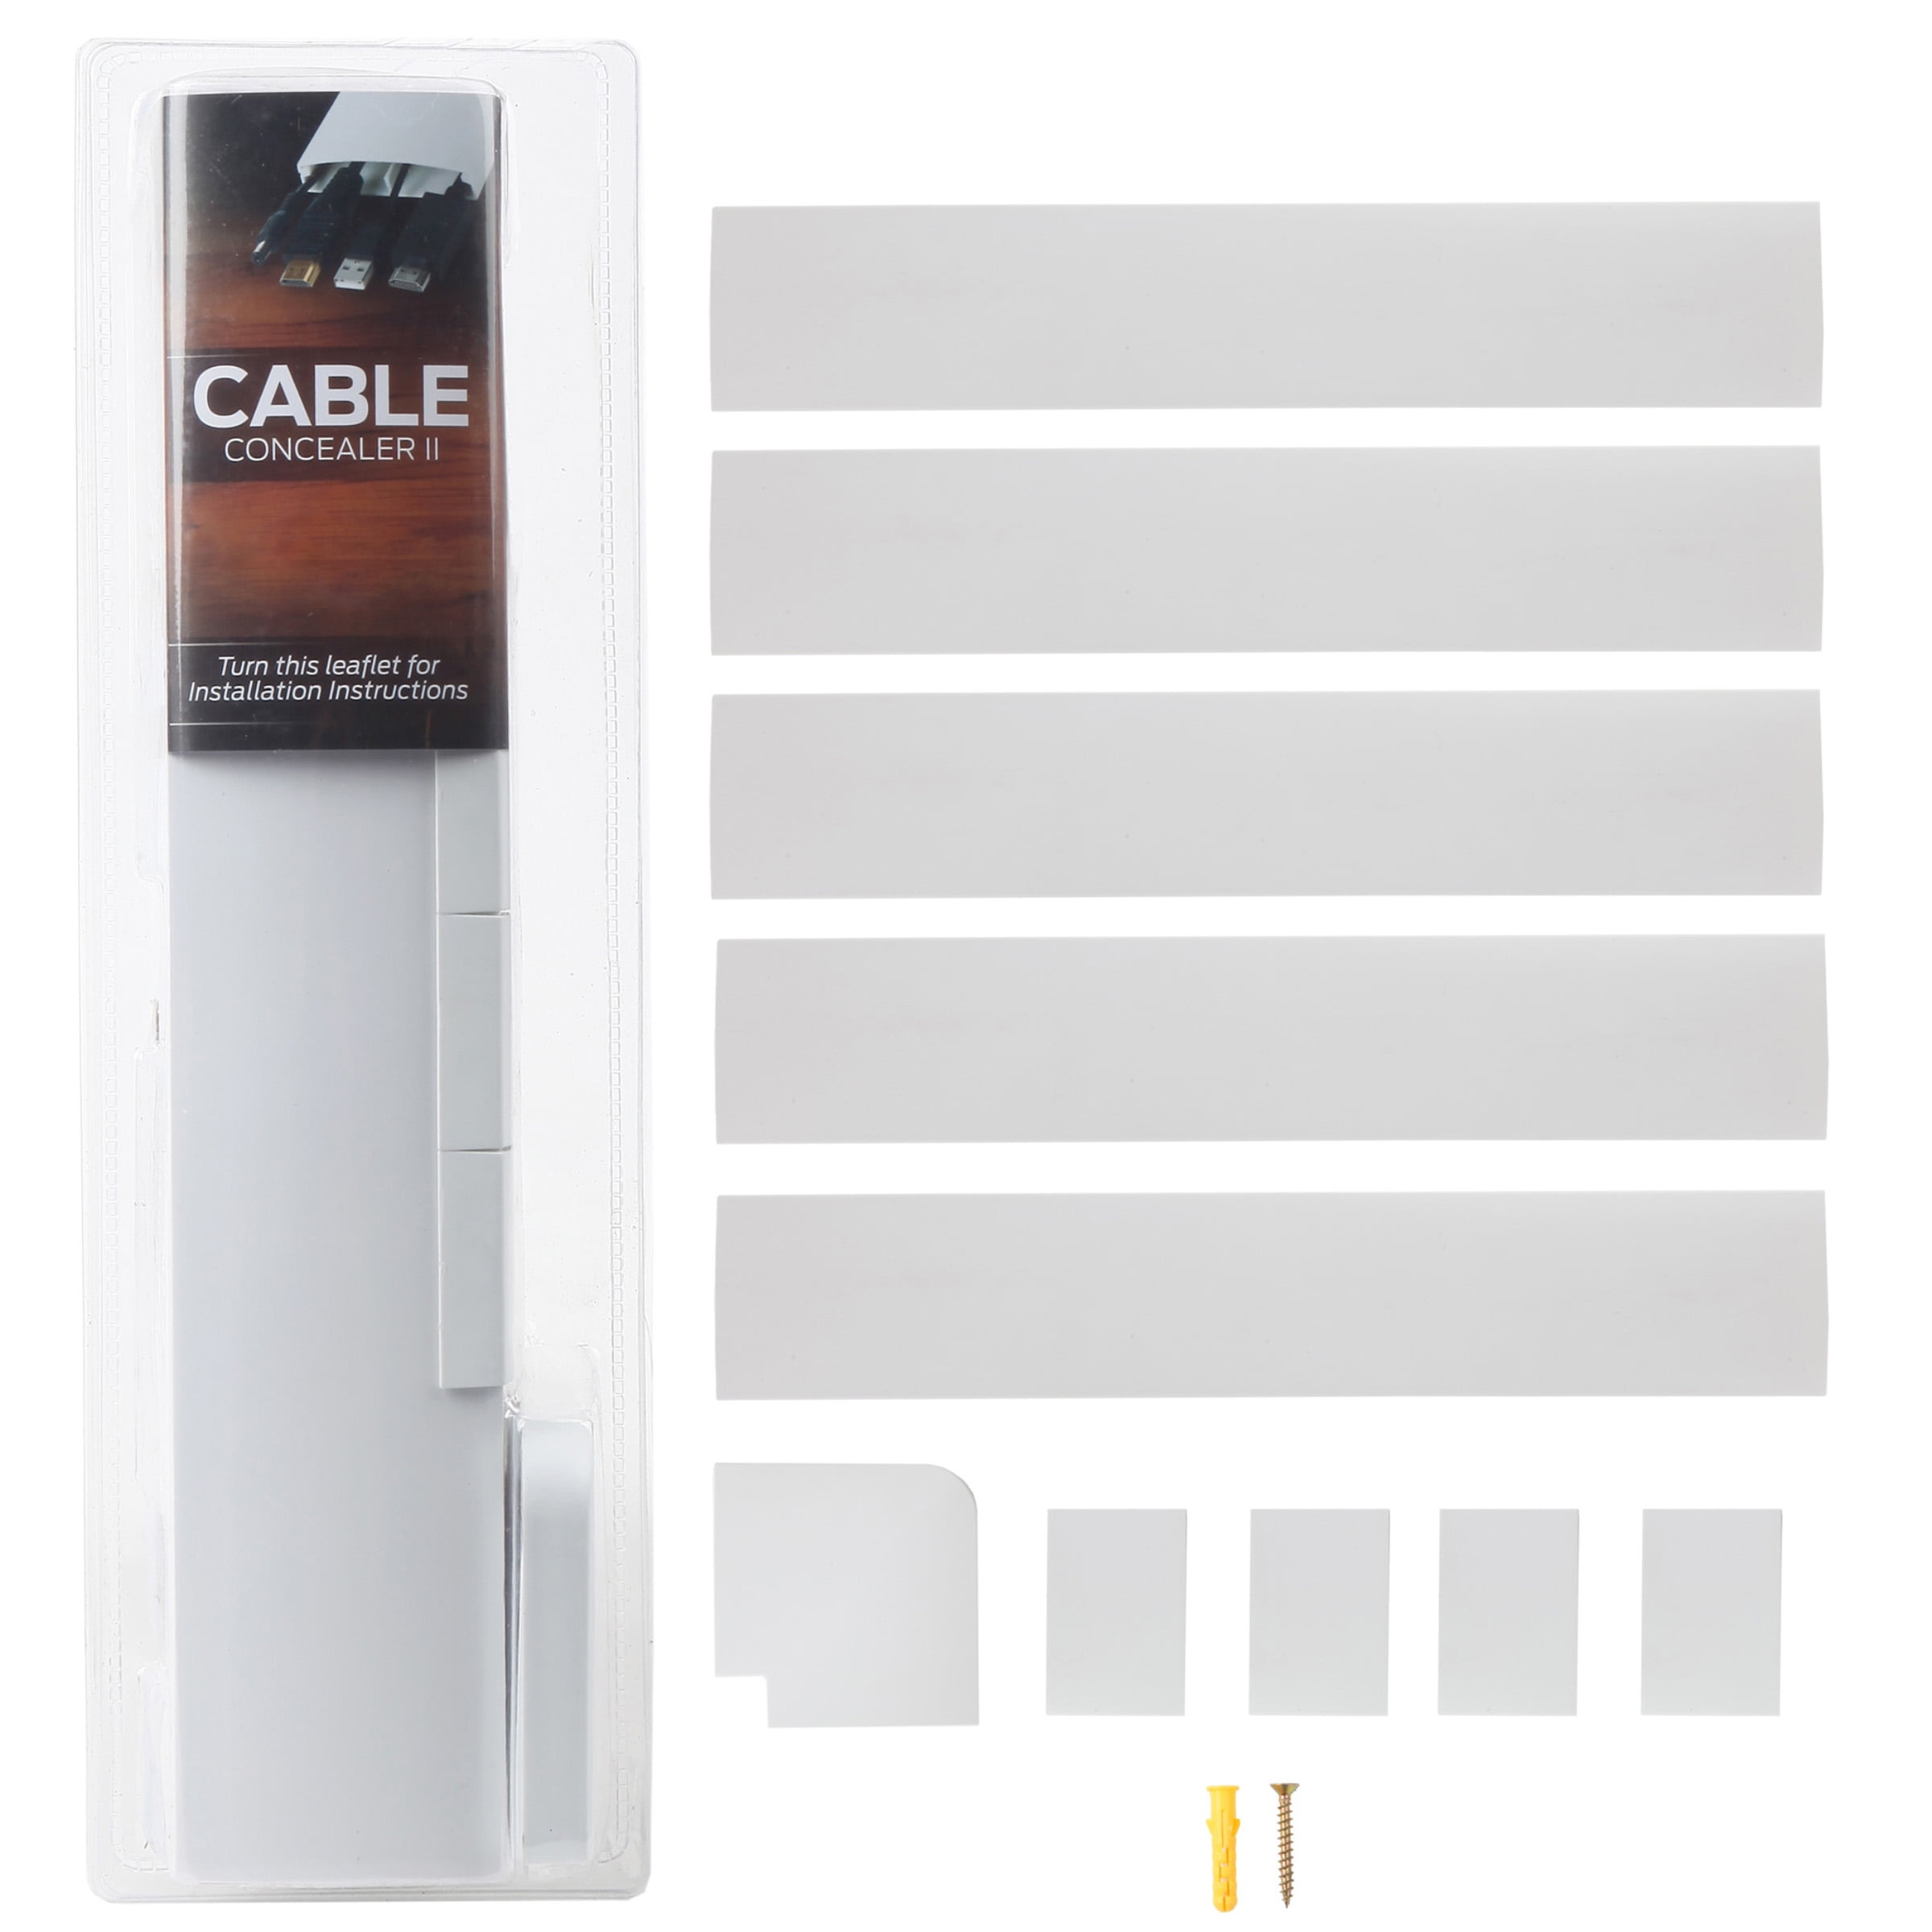 or TV Cables in Home or Office 128 Cable Management System for Hiding a Single Power Cord SimpleCord Cable Cover fits 1 Cord Speaker Wire Cord Concealer II One-Cord Raceway Kit